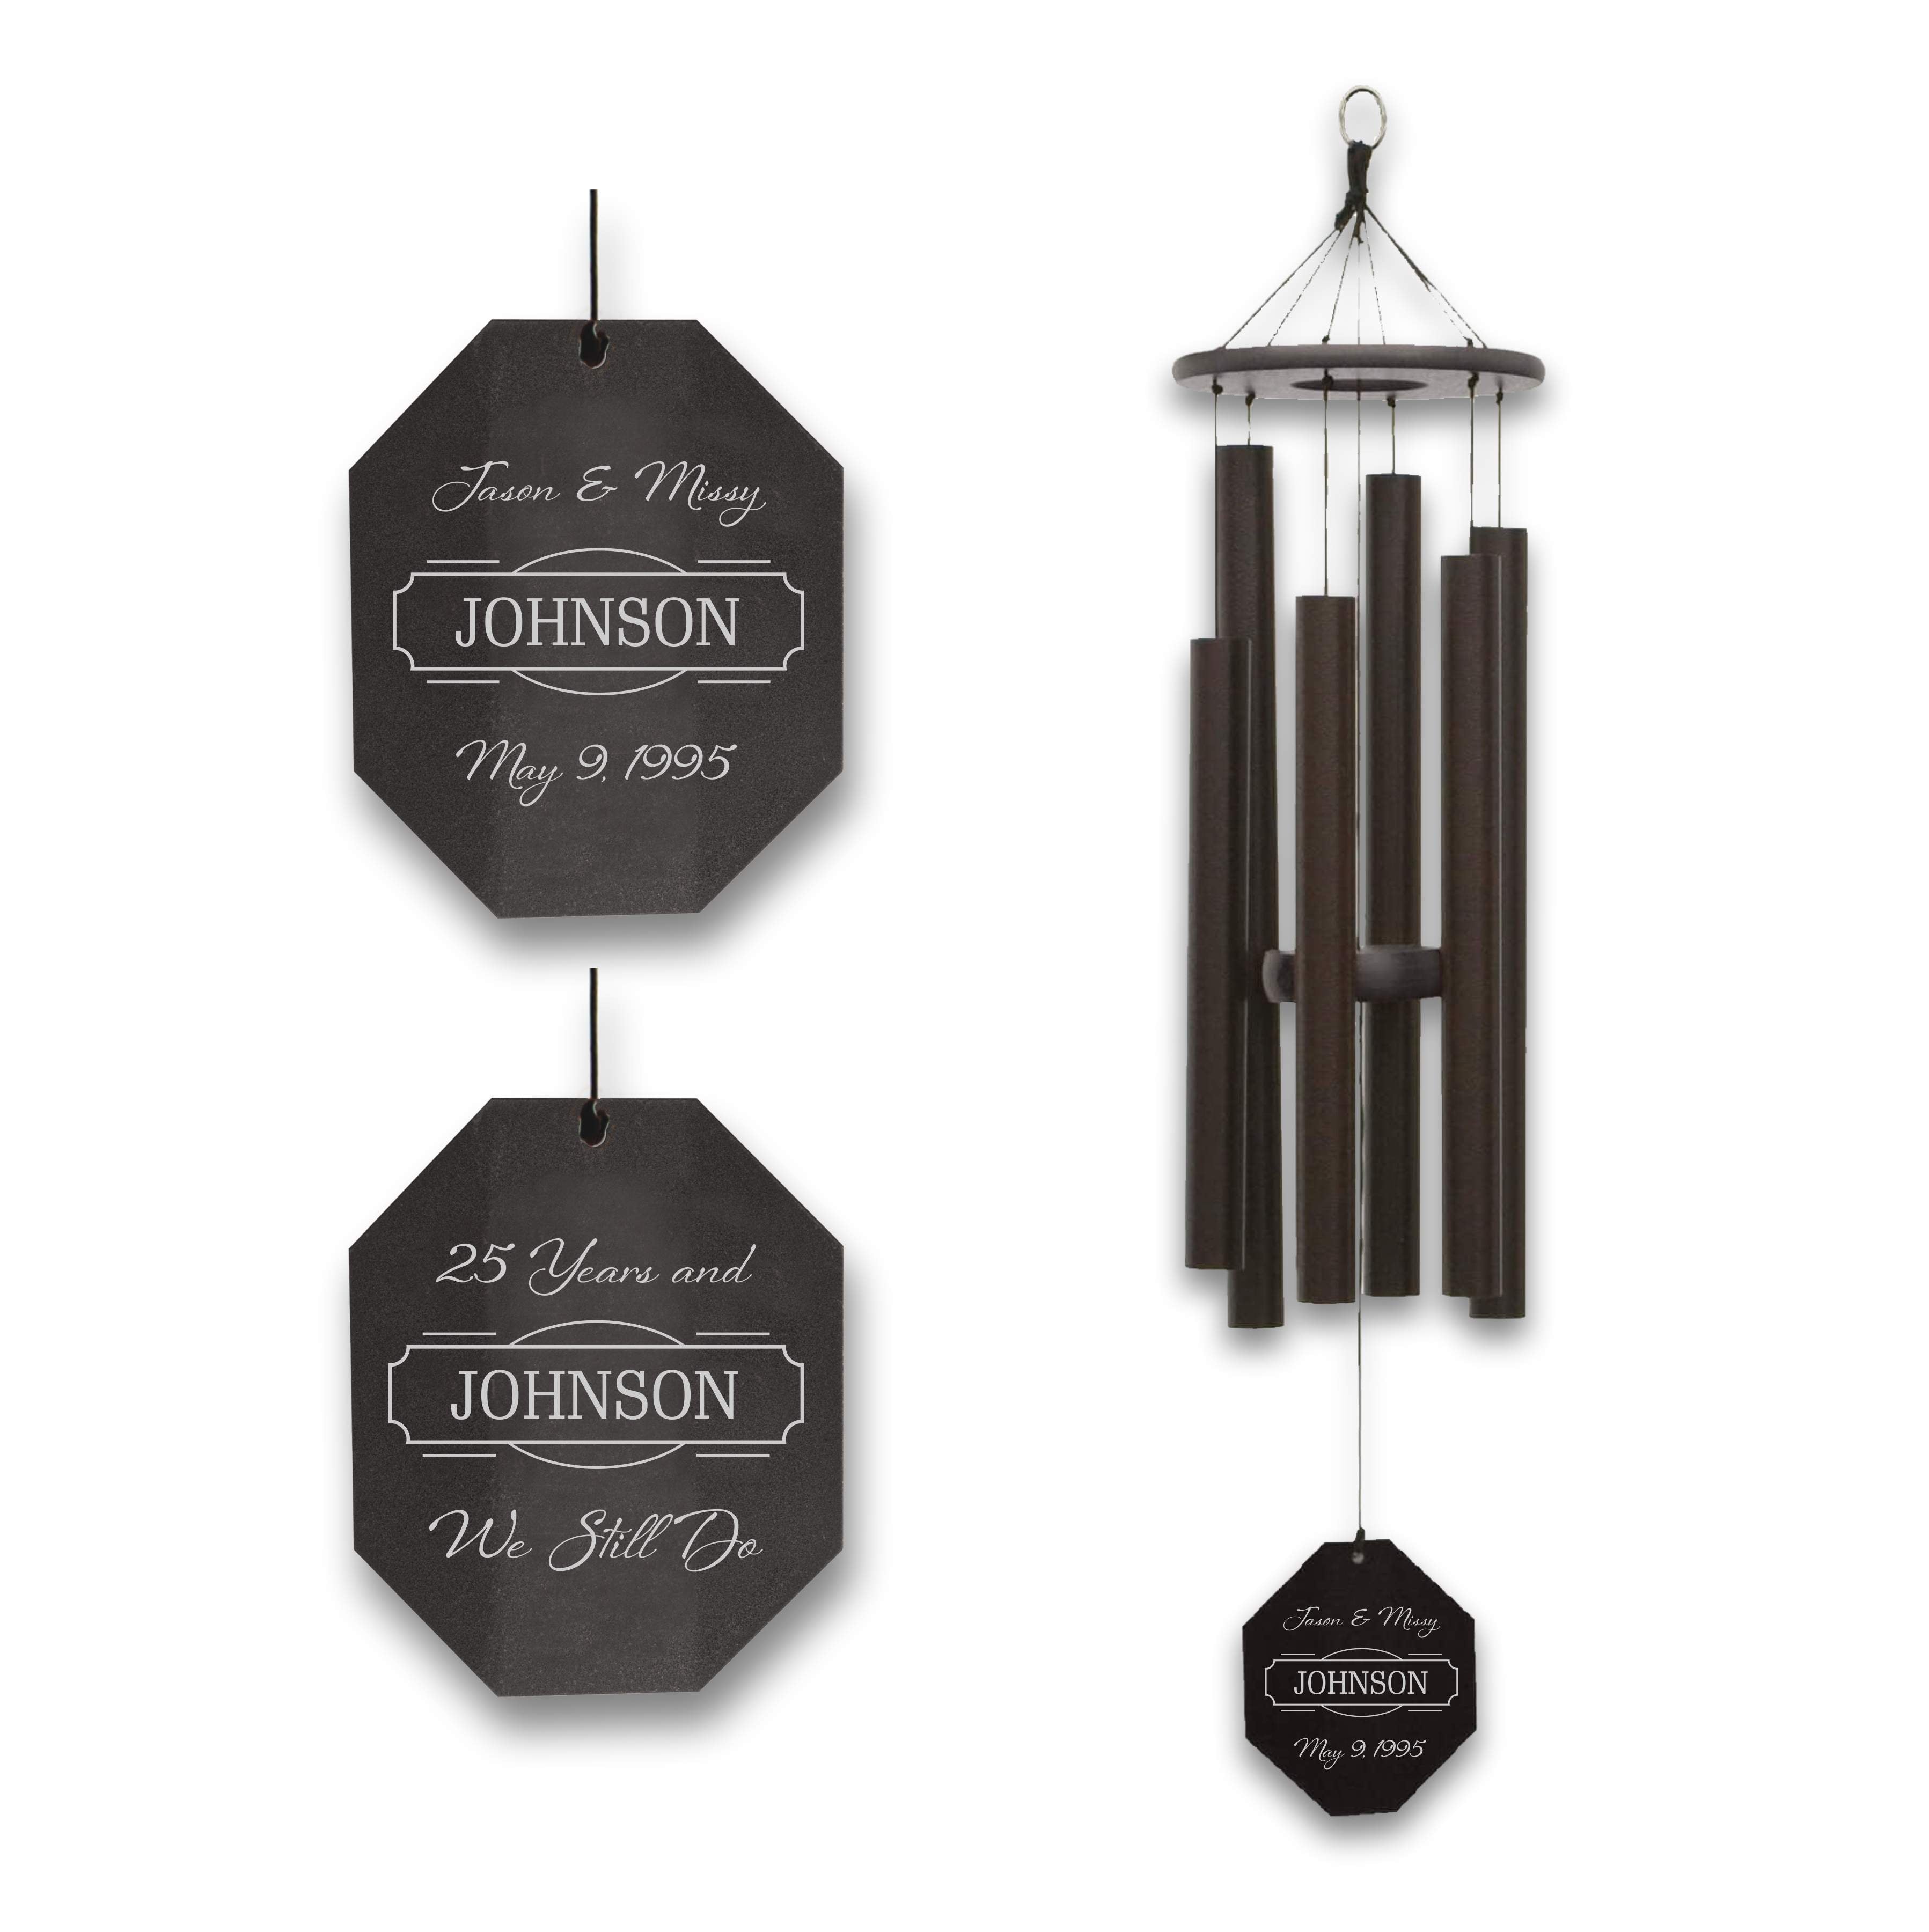 Anniversary Wind Chime | We Still Do | Amish Wind Chime